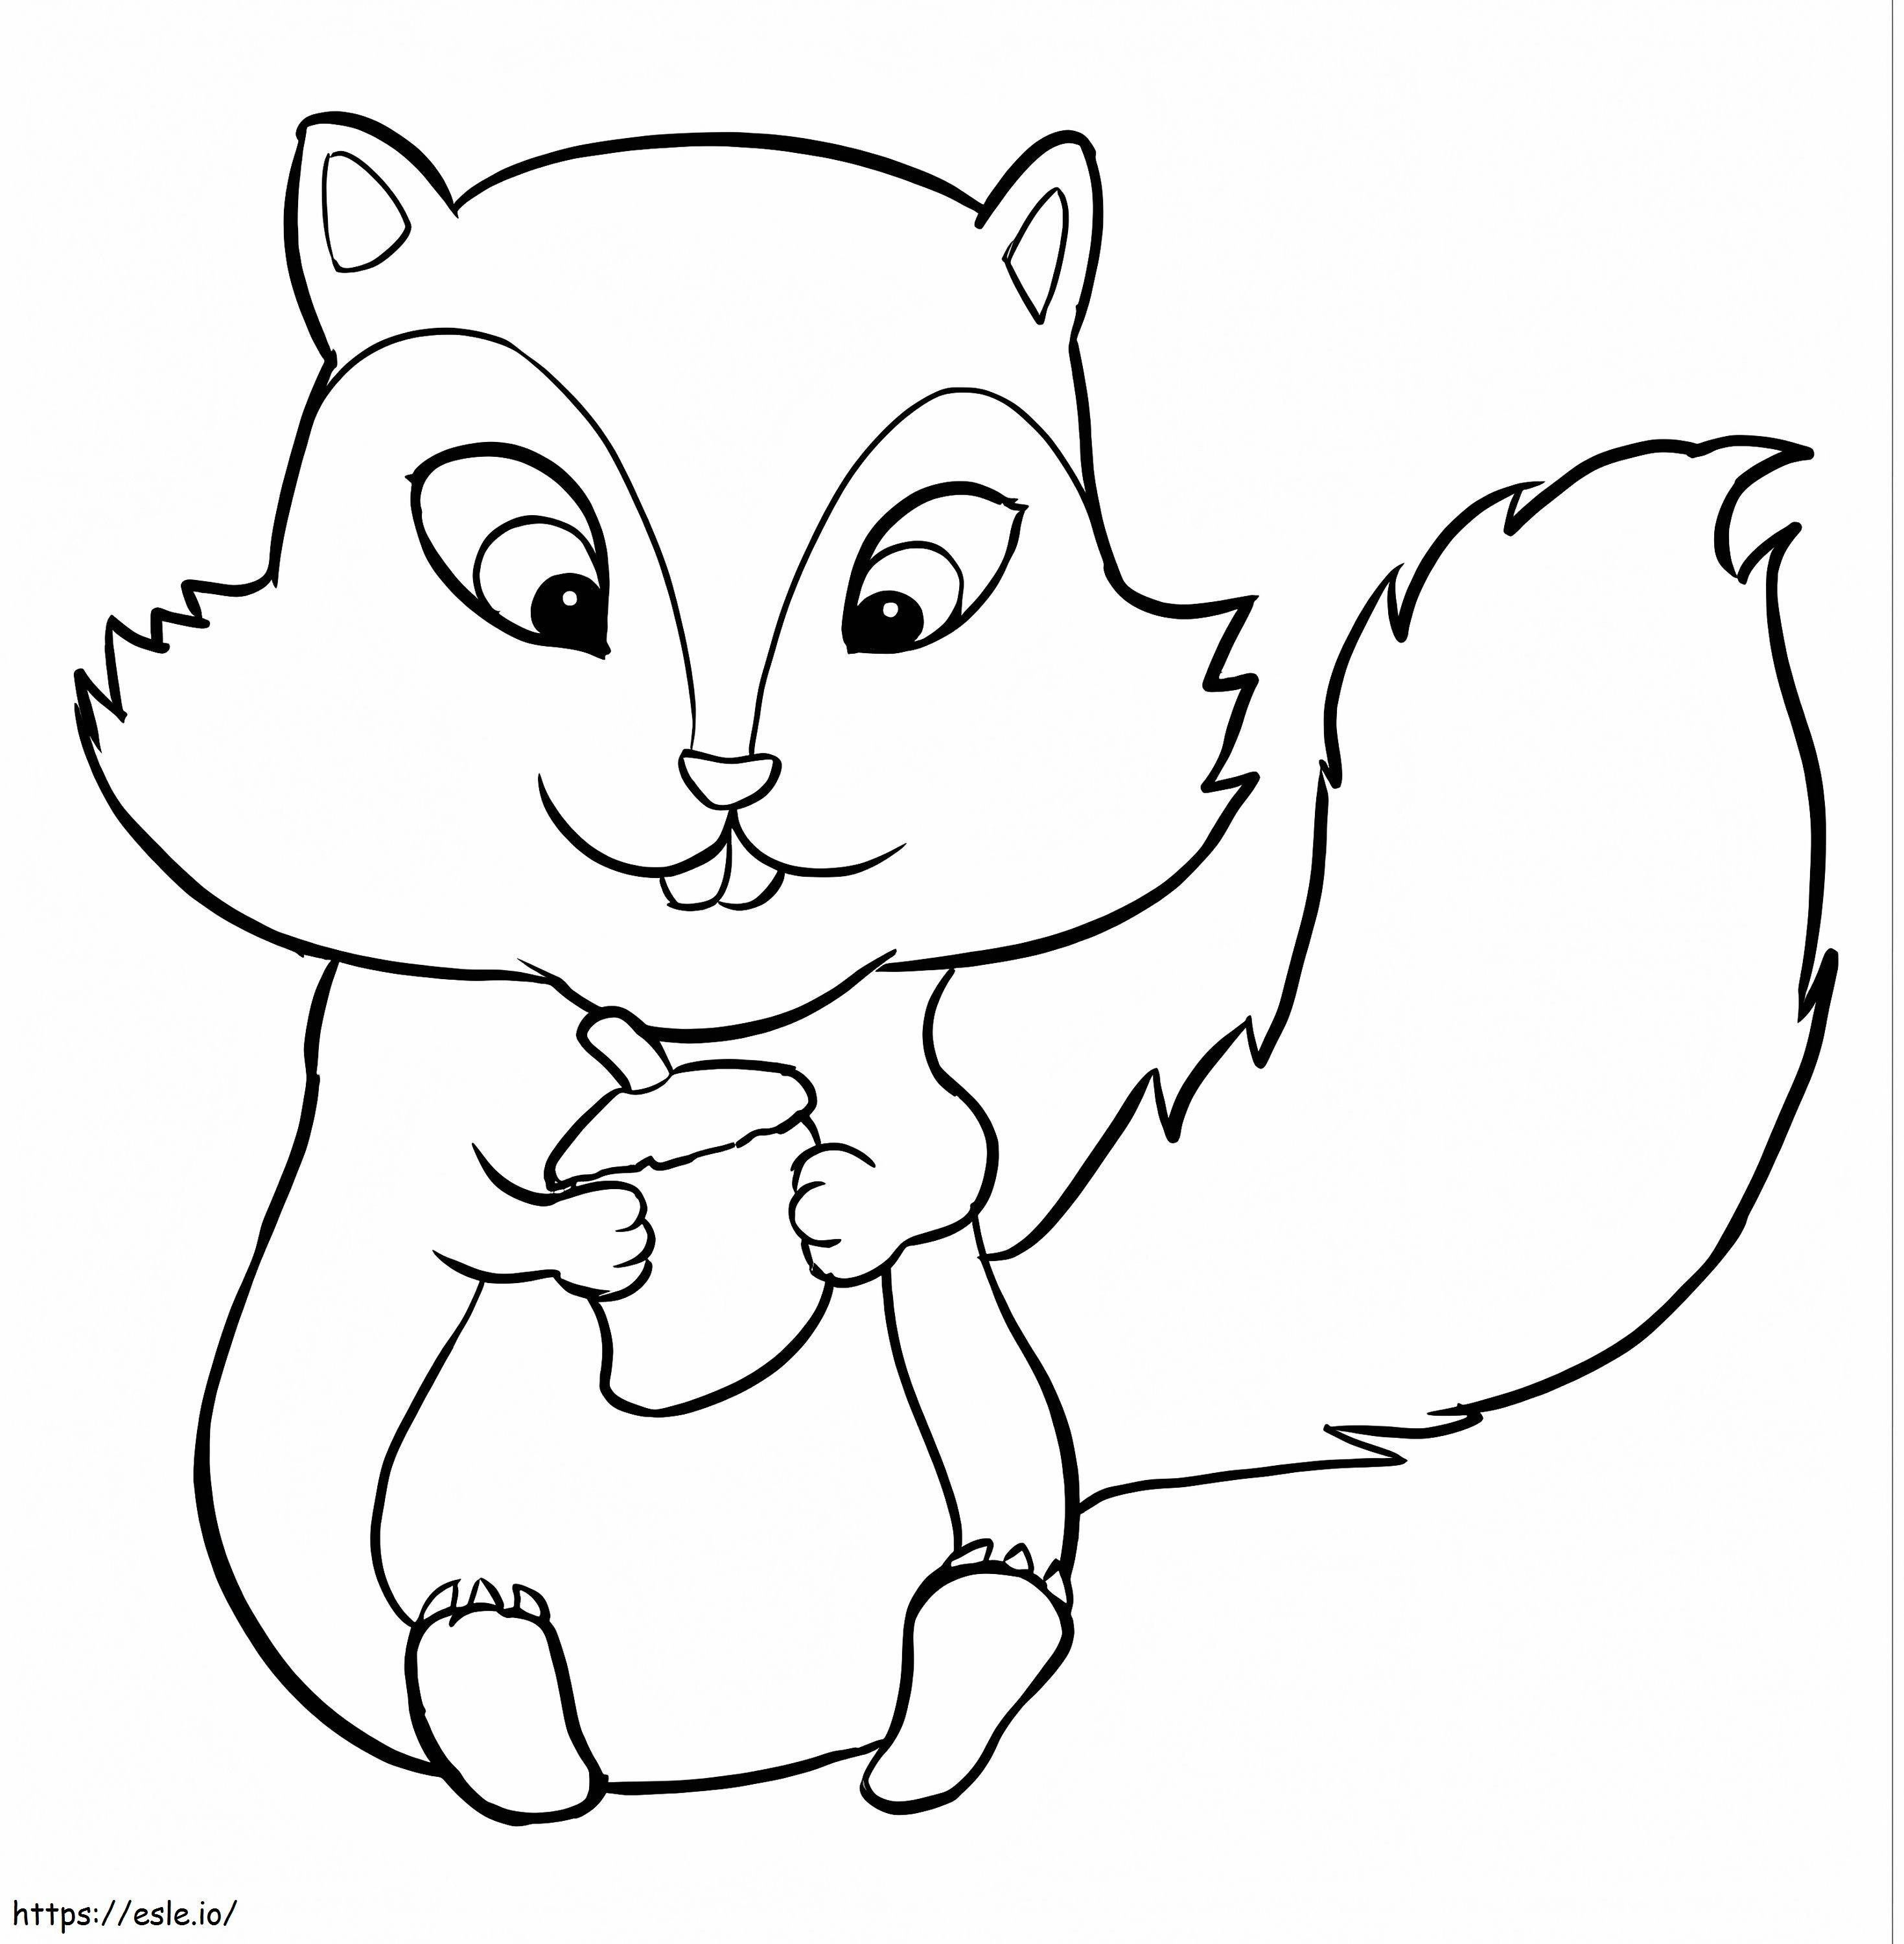 Little Chipmunk coloring page